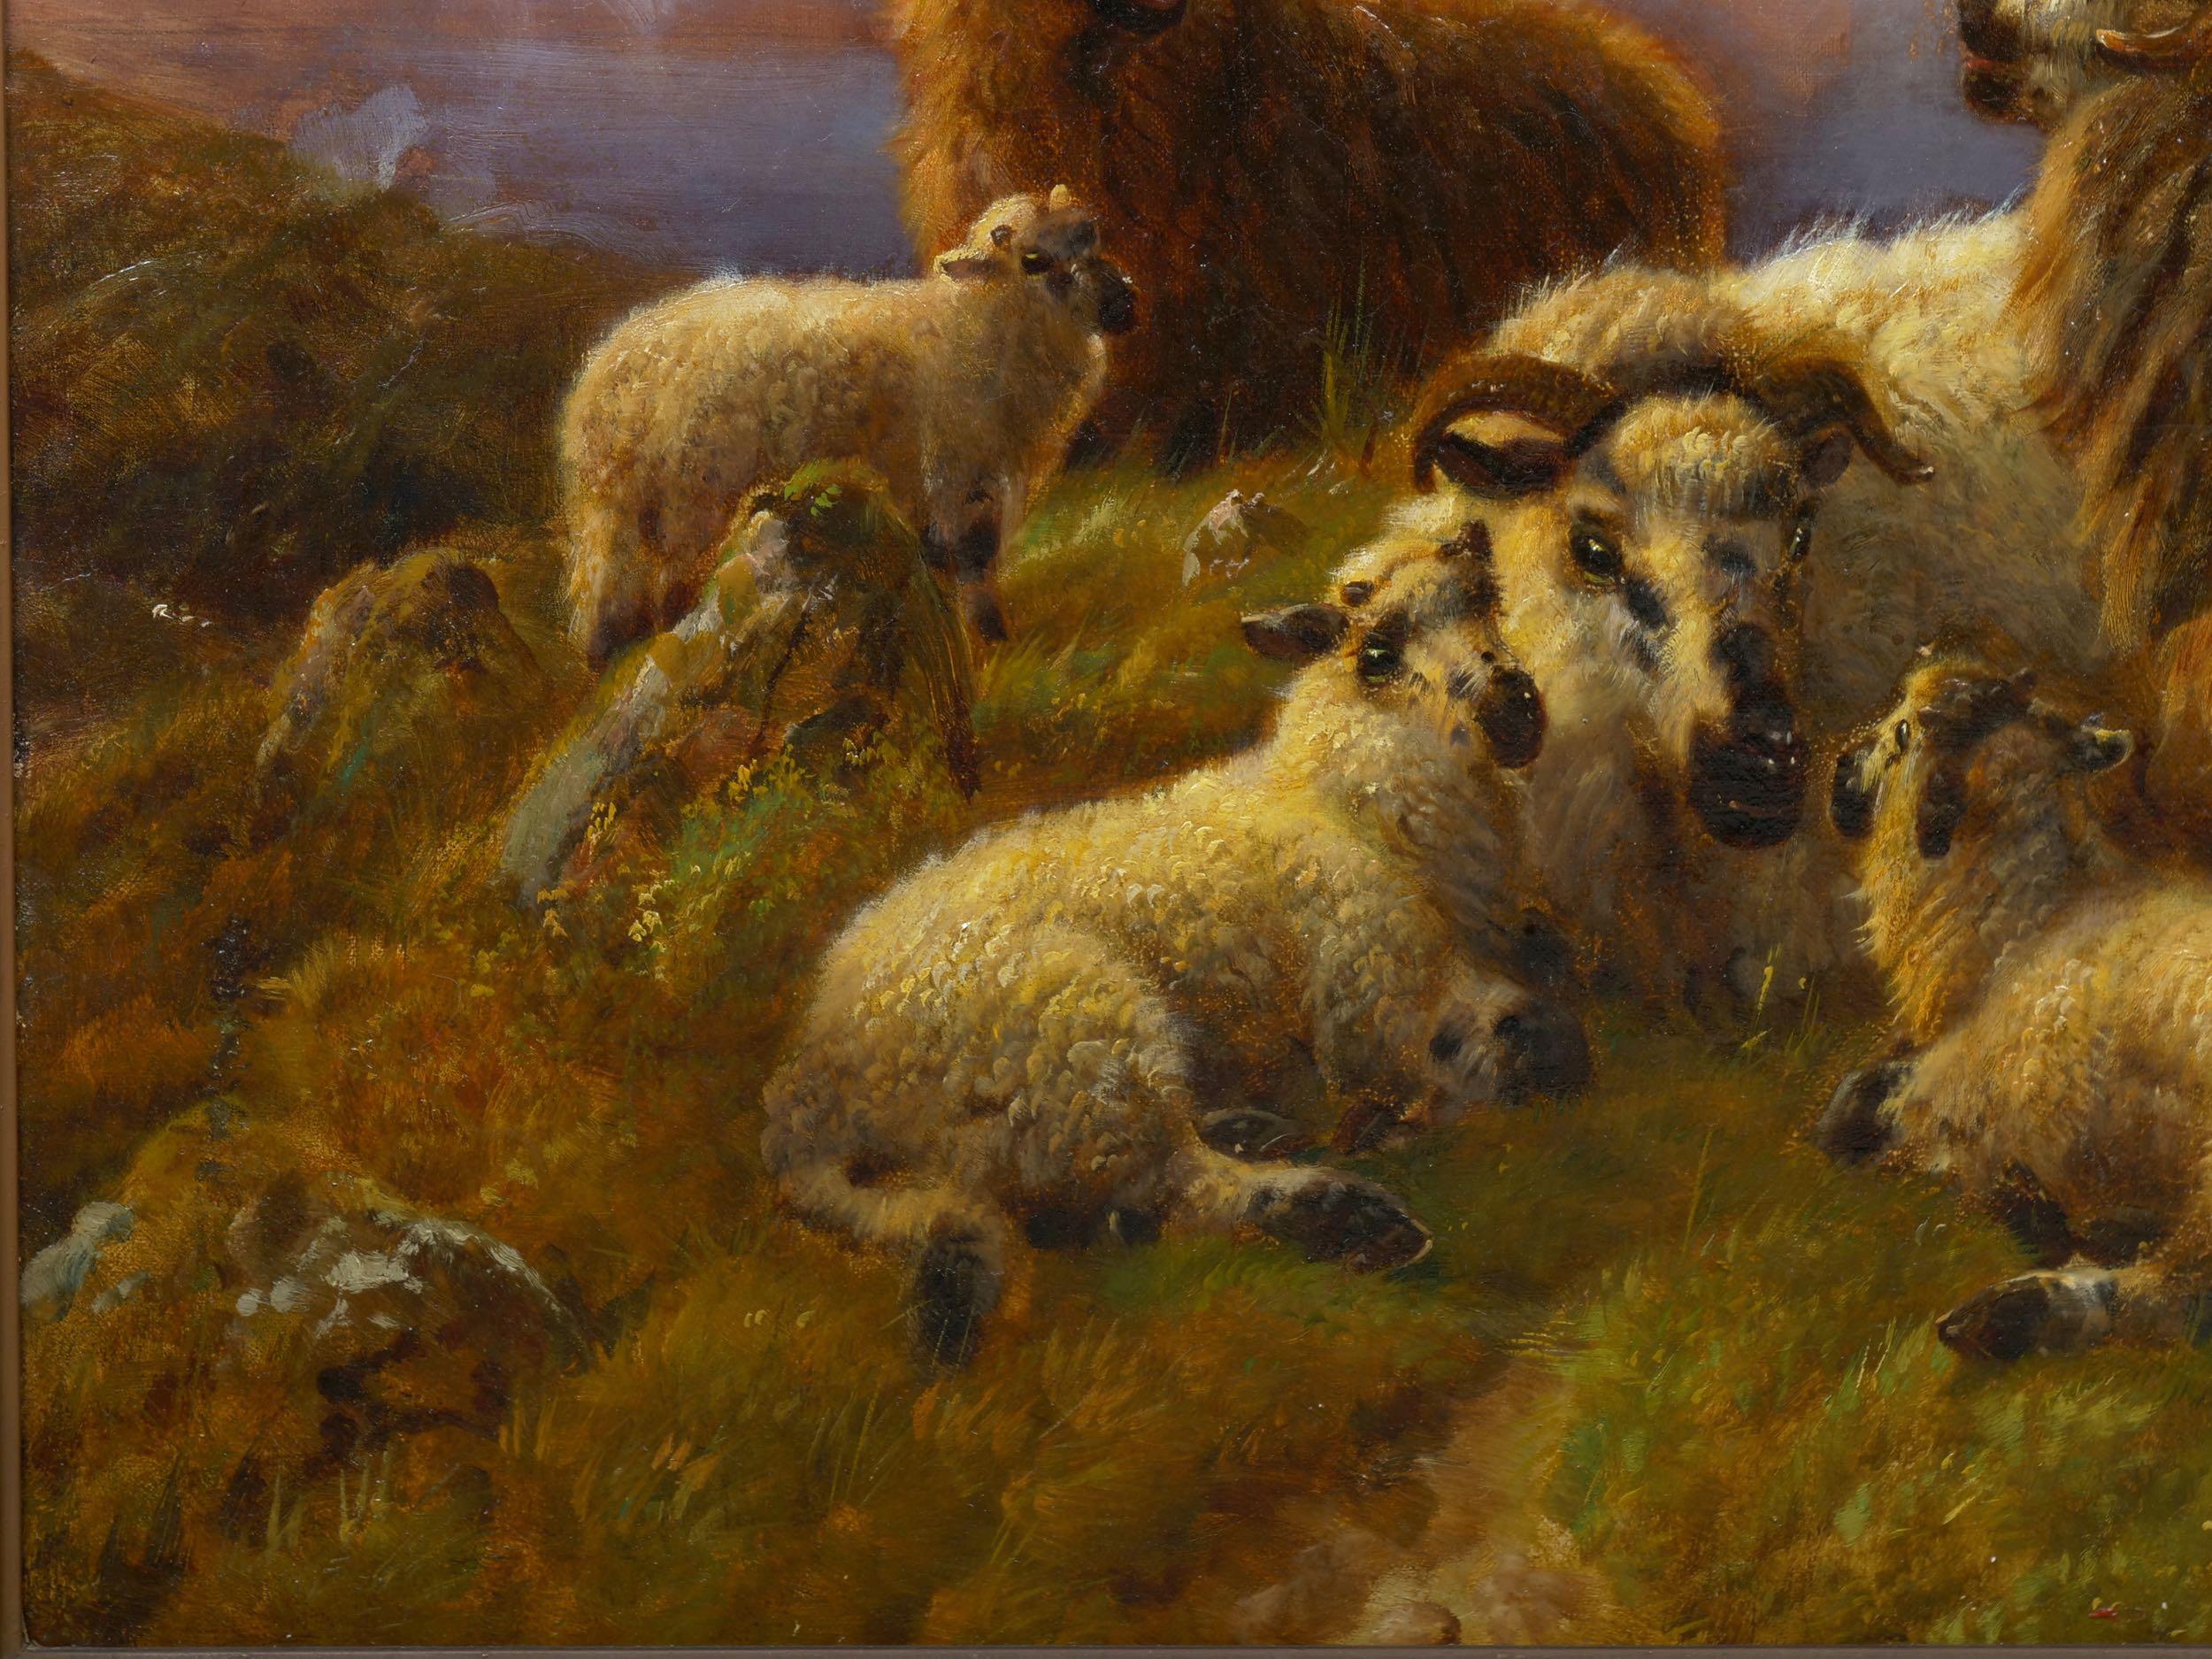 Hand-Painted “Sheep at Rest in the Highlands” '1914' Antique Oil Painting by Robert Watson